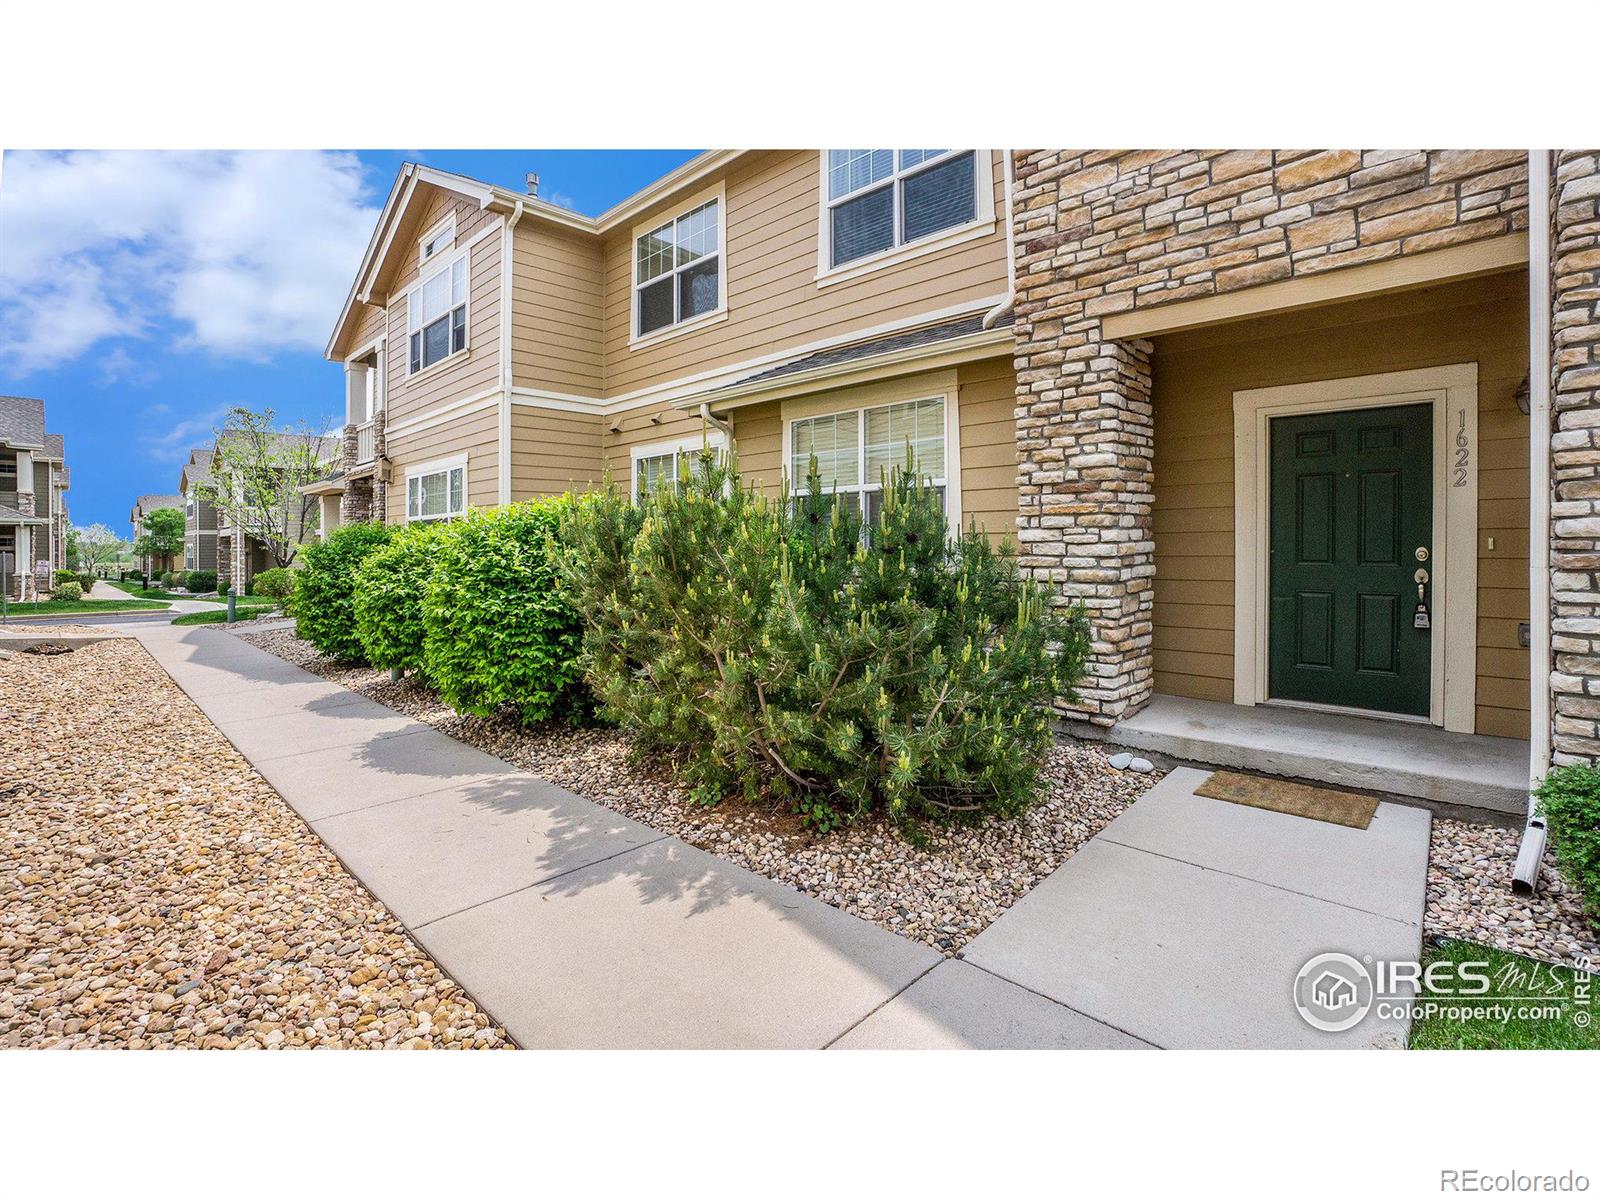 Report Image for 6603 W 3rd Street,Greeley, Colorado